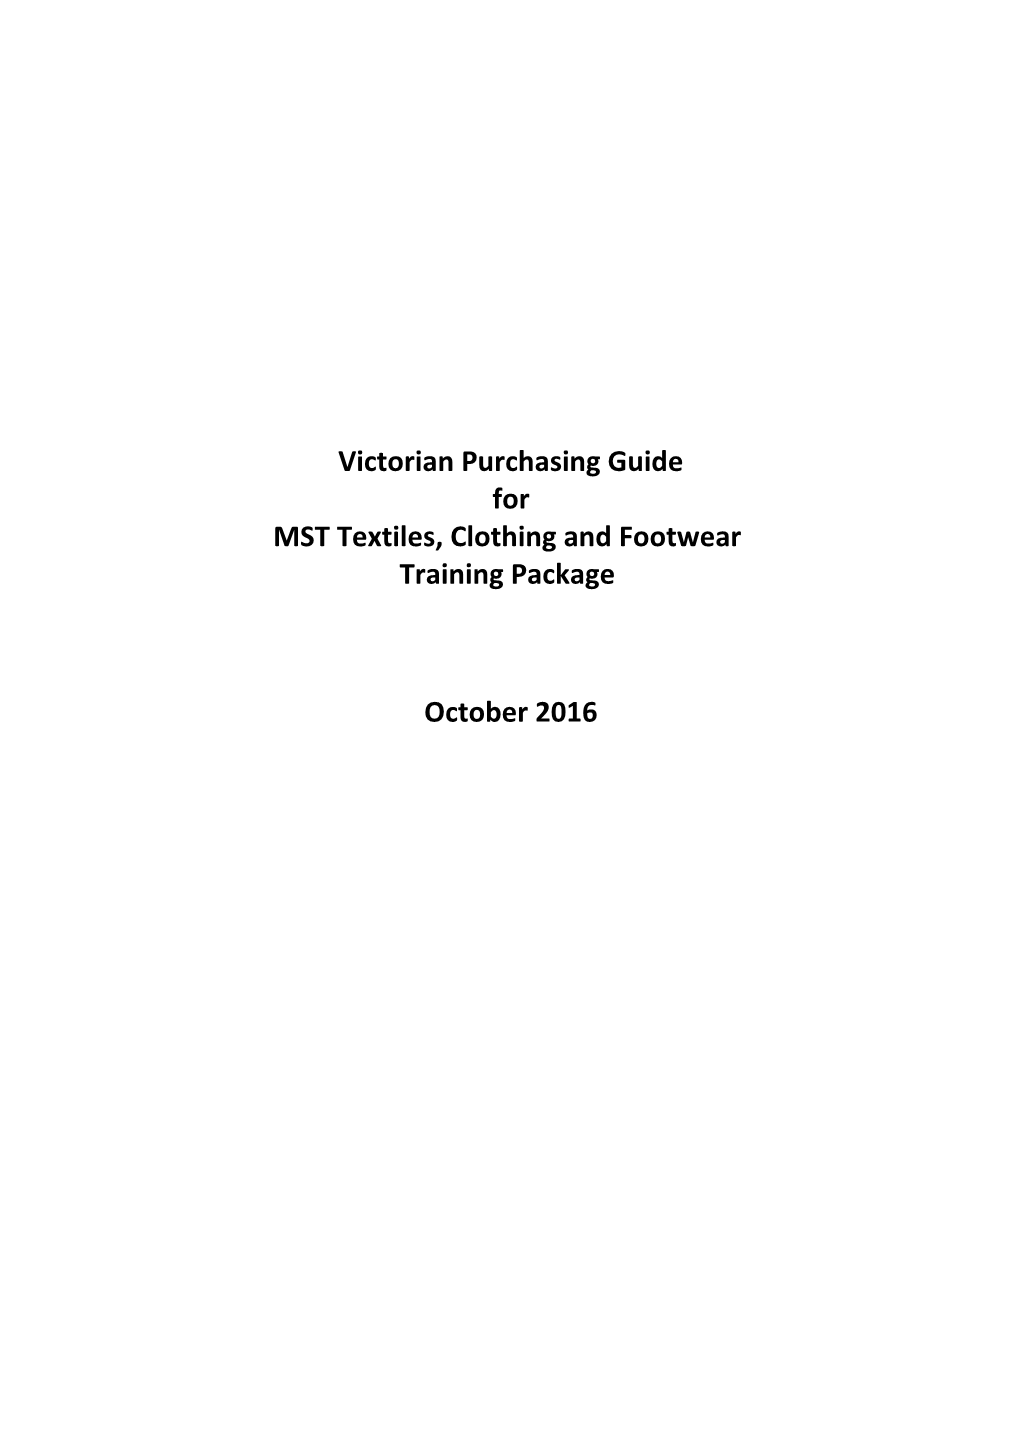 Victorian Purchasing Guide for MST Textiles Clothing and Footwear